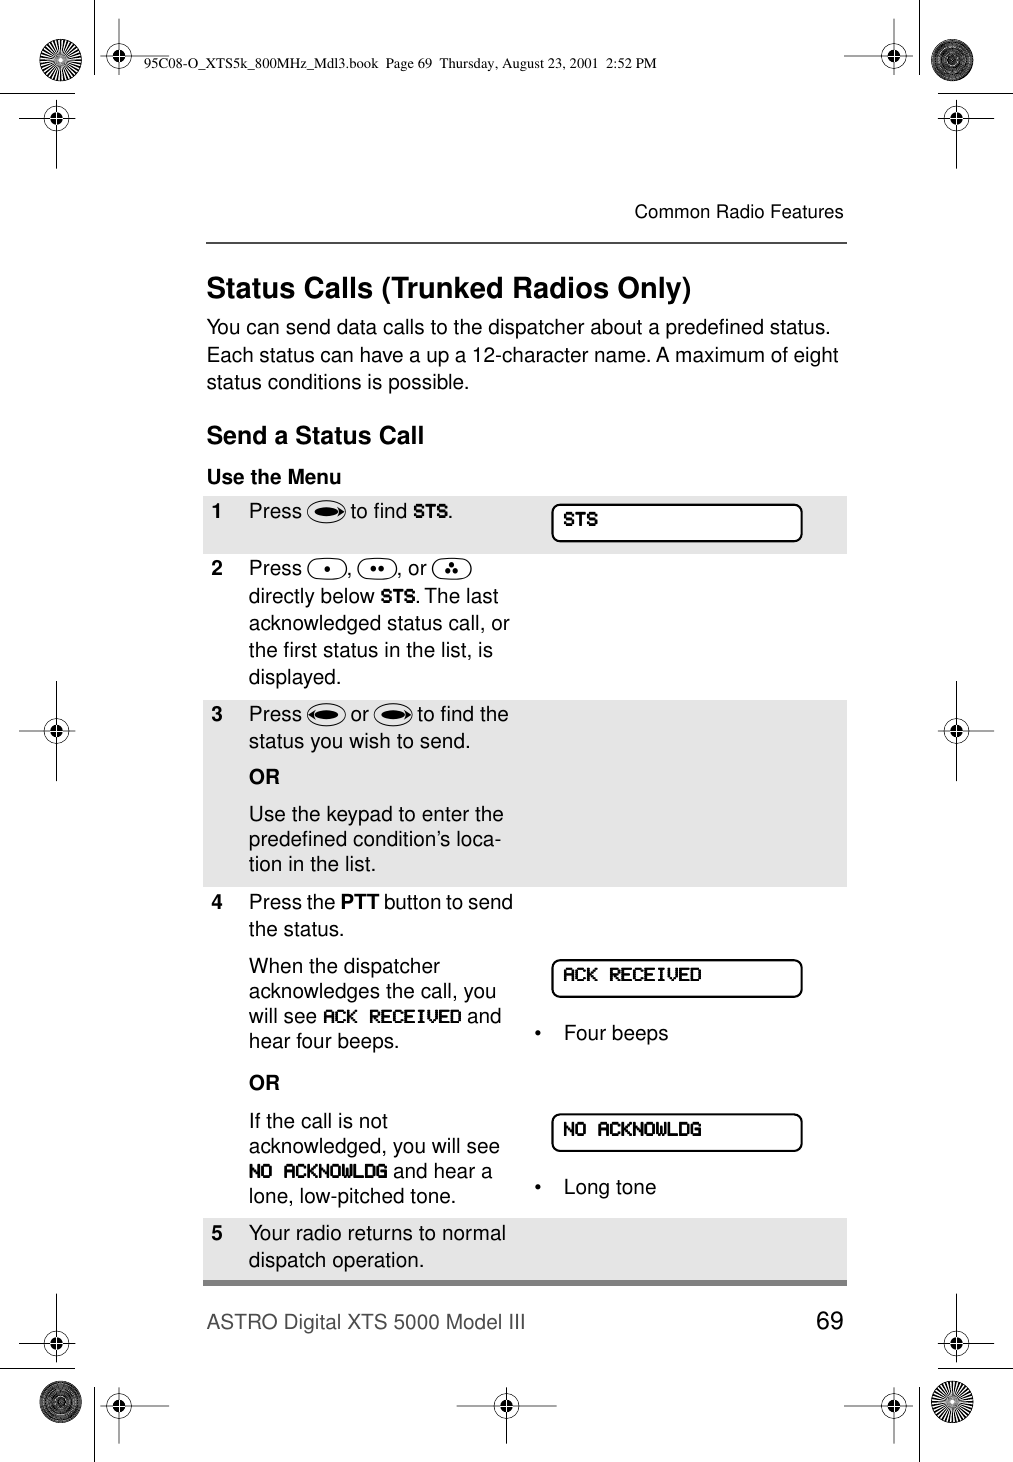 ASTRO Digital XTS 5000 Model III 69Common Radio FeaturesStatus Calls (Trunked Radios Only)You can send data calls to the dispatcher about a predeﬁned status. Each status can have a up a 12-character name. A maximum of eight status conditions is possible.Send a Status CallUse the Menu1Press U to ﬁnd SSSSTTTTSSSS.2Press D, E, or F directly below SSSSTTTTSSSS. The last acknowledged status call, or the ﬁrst status in the list, is displayed.3Press V or U to ﬁnd the status you wish to send.ORUse the keypad to enter the predeﬁned condition’s loca-tion in the list. 4Press the PTT button to send the status.When the dispatcher acknowledges the call, you will see AAAACCCCKKKK    RRRREEEECCCCEEEEIIIIVVVVEEEEDDDD and hear four beeps.OR• Four beepsIf the call is not acknowledged, you will see NNNNOOOO    AAAACCCCKKKKNNNNOOOOWWWWLLLLDDDDGGGG and hear a lone, low-pitched tone. • Long tone5Your radio returns to normal dispatch operation.SSSSTTTTSSSSAAAACCCCKKKK    RRRREEEECCCCEEEEIIIIVVVVEEEEDDDDNNNNOOOO    AAAACCCCKKKKNNNNOOOOWWWWLLLLDDDDGGGG95C08-O_XTS5k_800MHz_Mdl3.book  Page 69  Thursday, August 23, 2001  2:52 PM